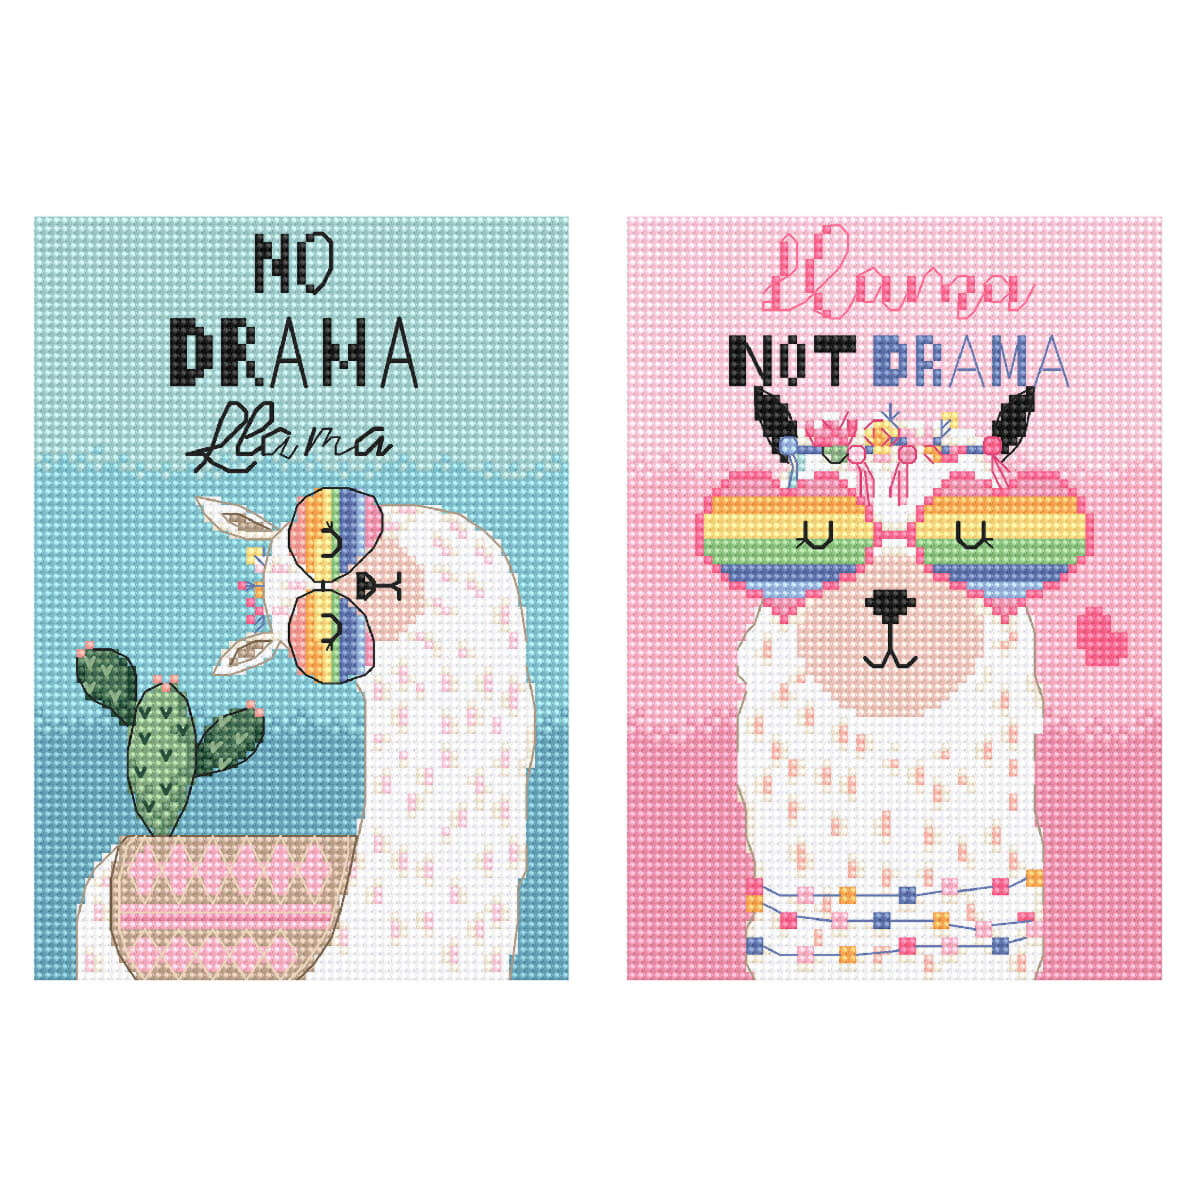 Two whimsical and colorful cross stitch designs with...